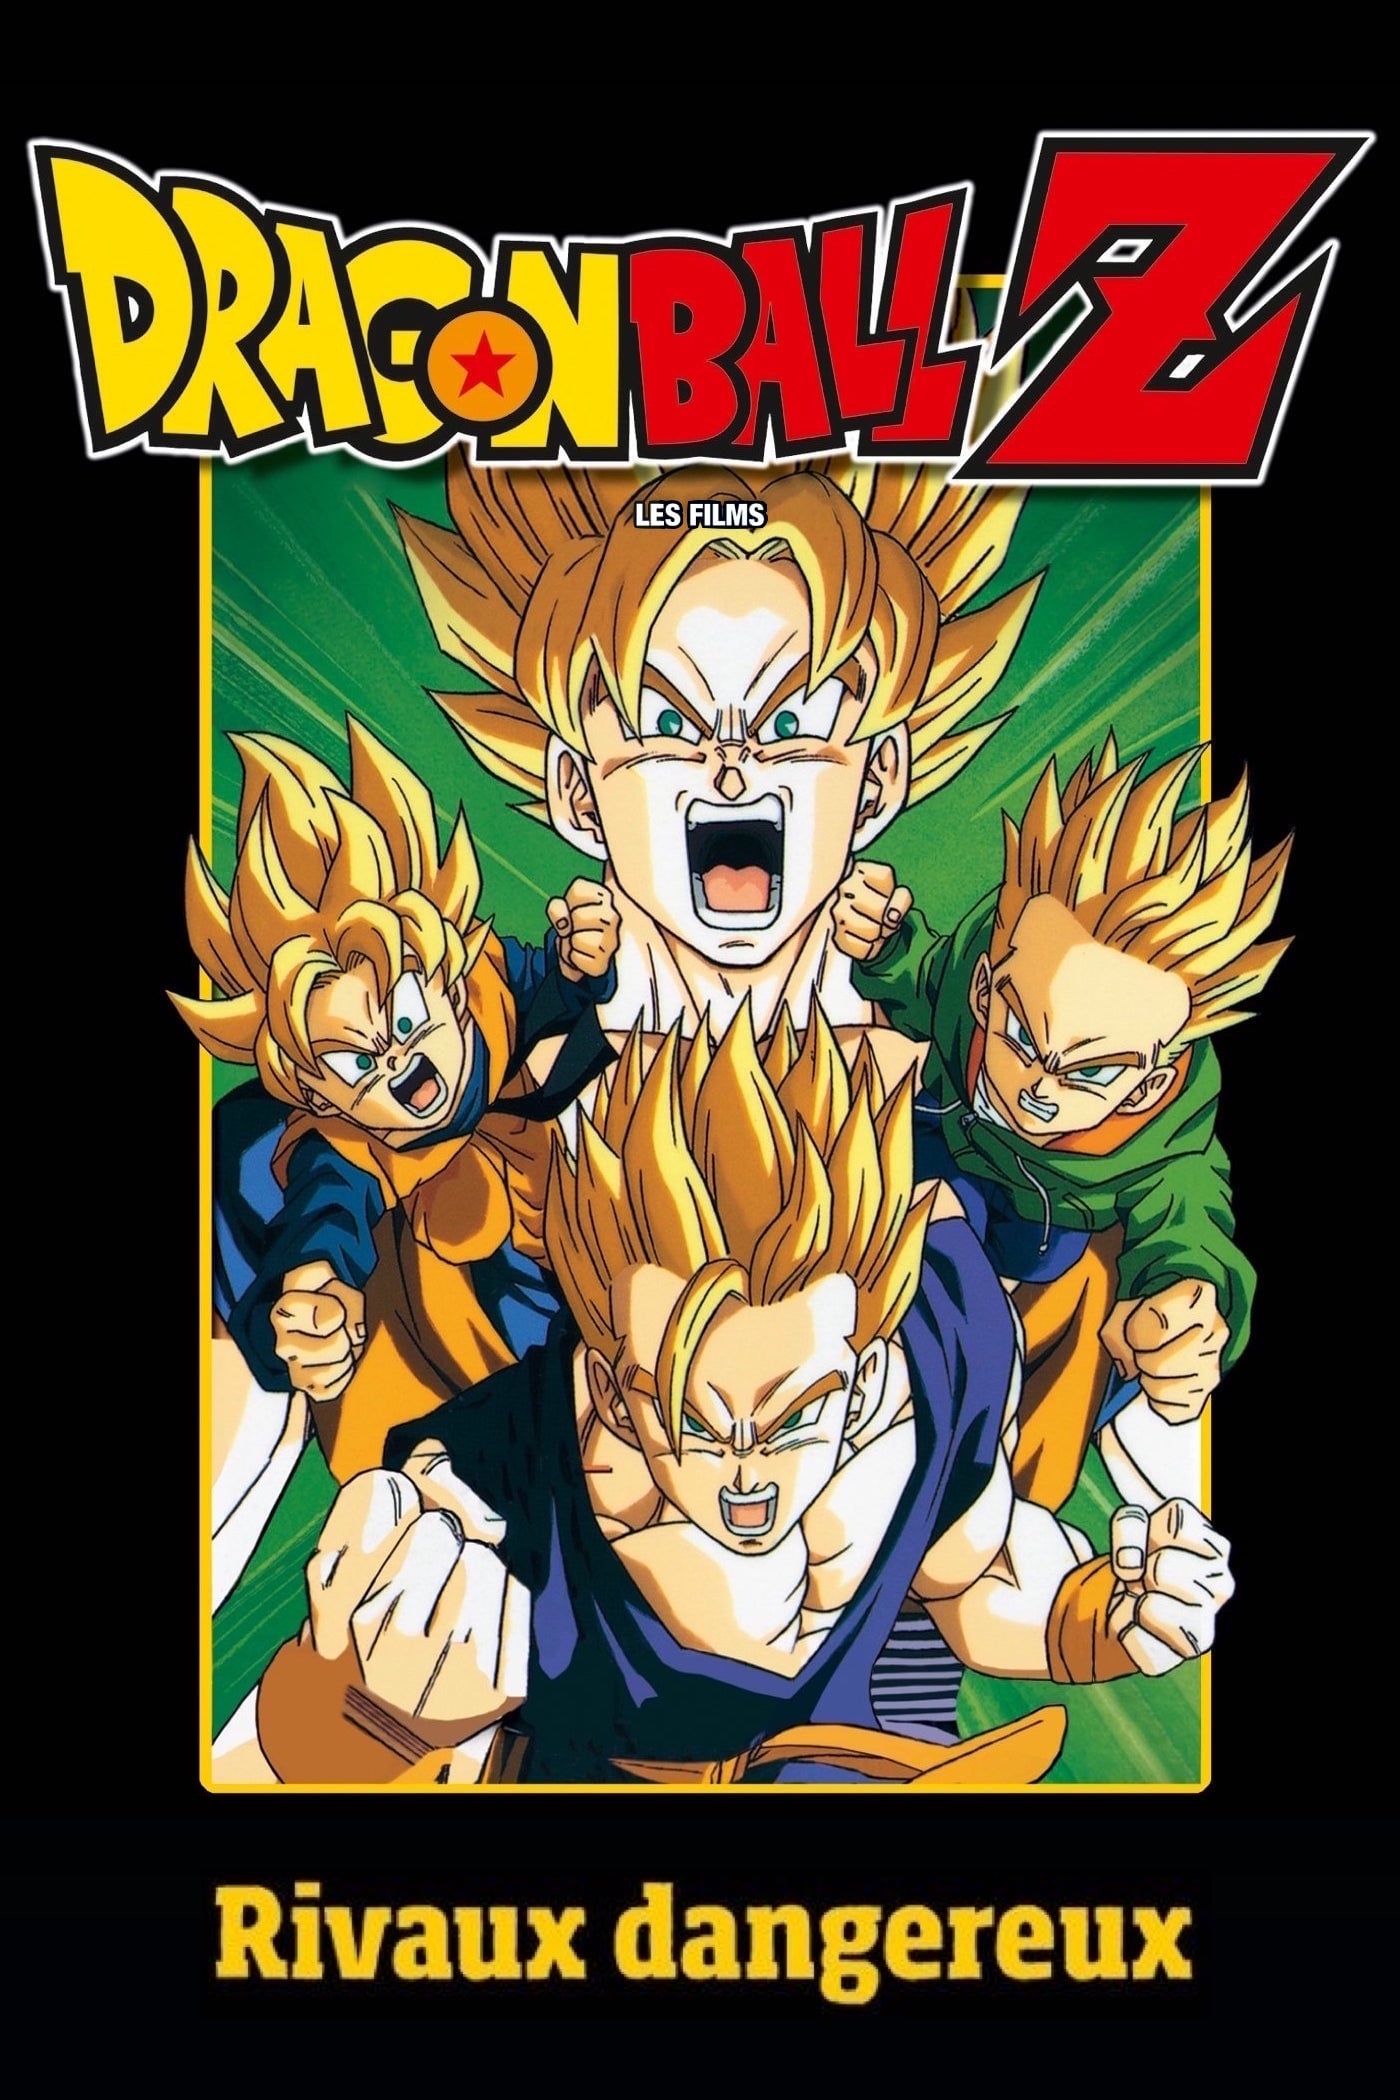 [Adventure] Dragon Ball Z Movie 10 – Broly: Second Coming (Movie) (Sub) New Released